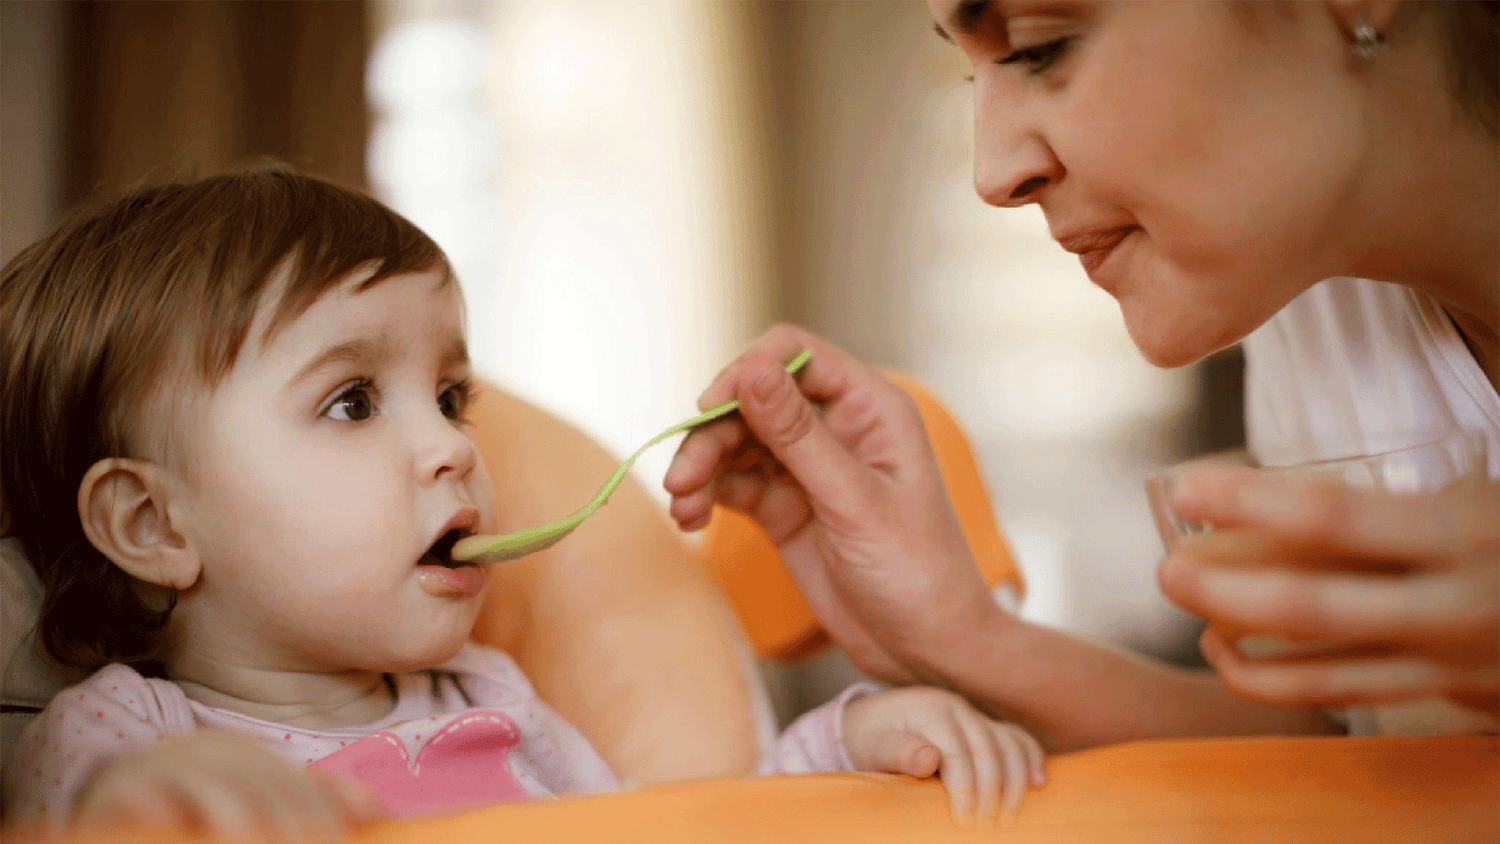 Nervous About weaning Your Baby? Here Is What You Need To Know